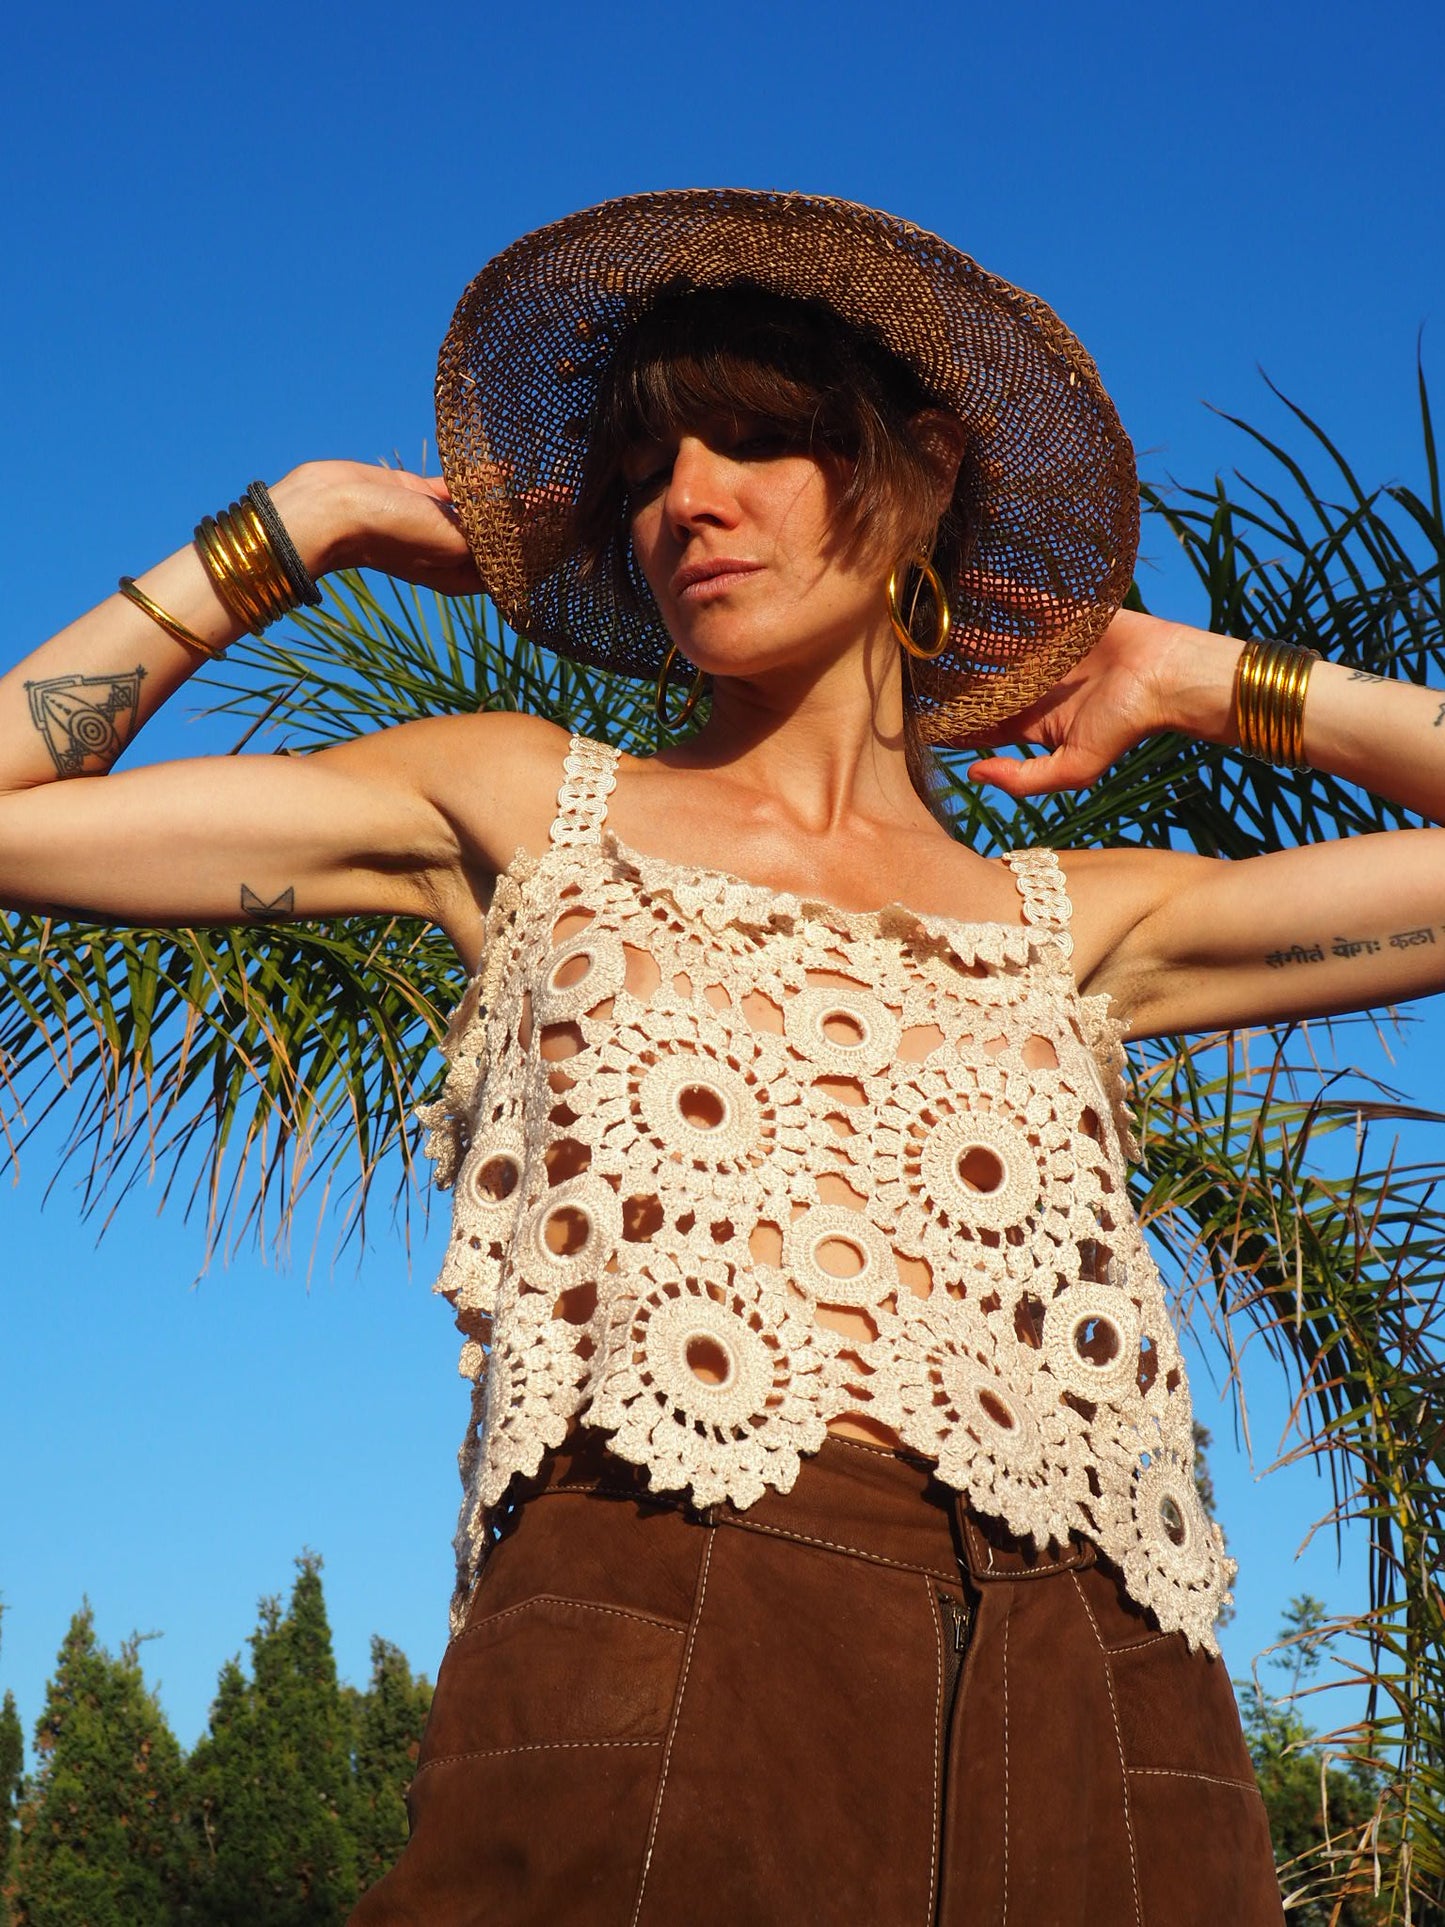 Antique Lace up-cycled crop top by Vagabond Ibiza